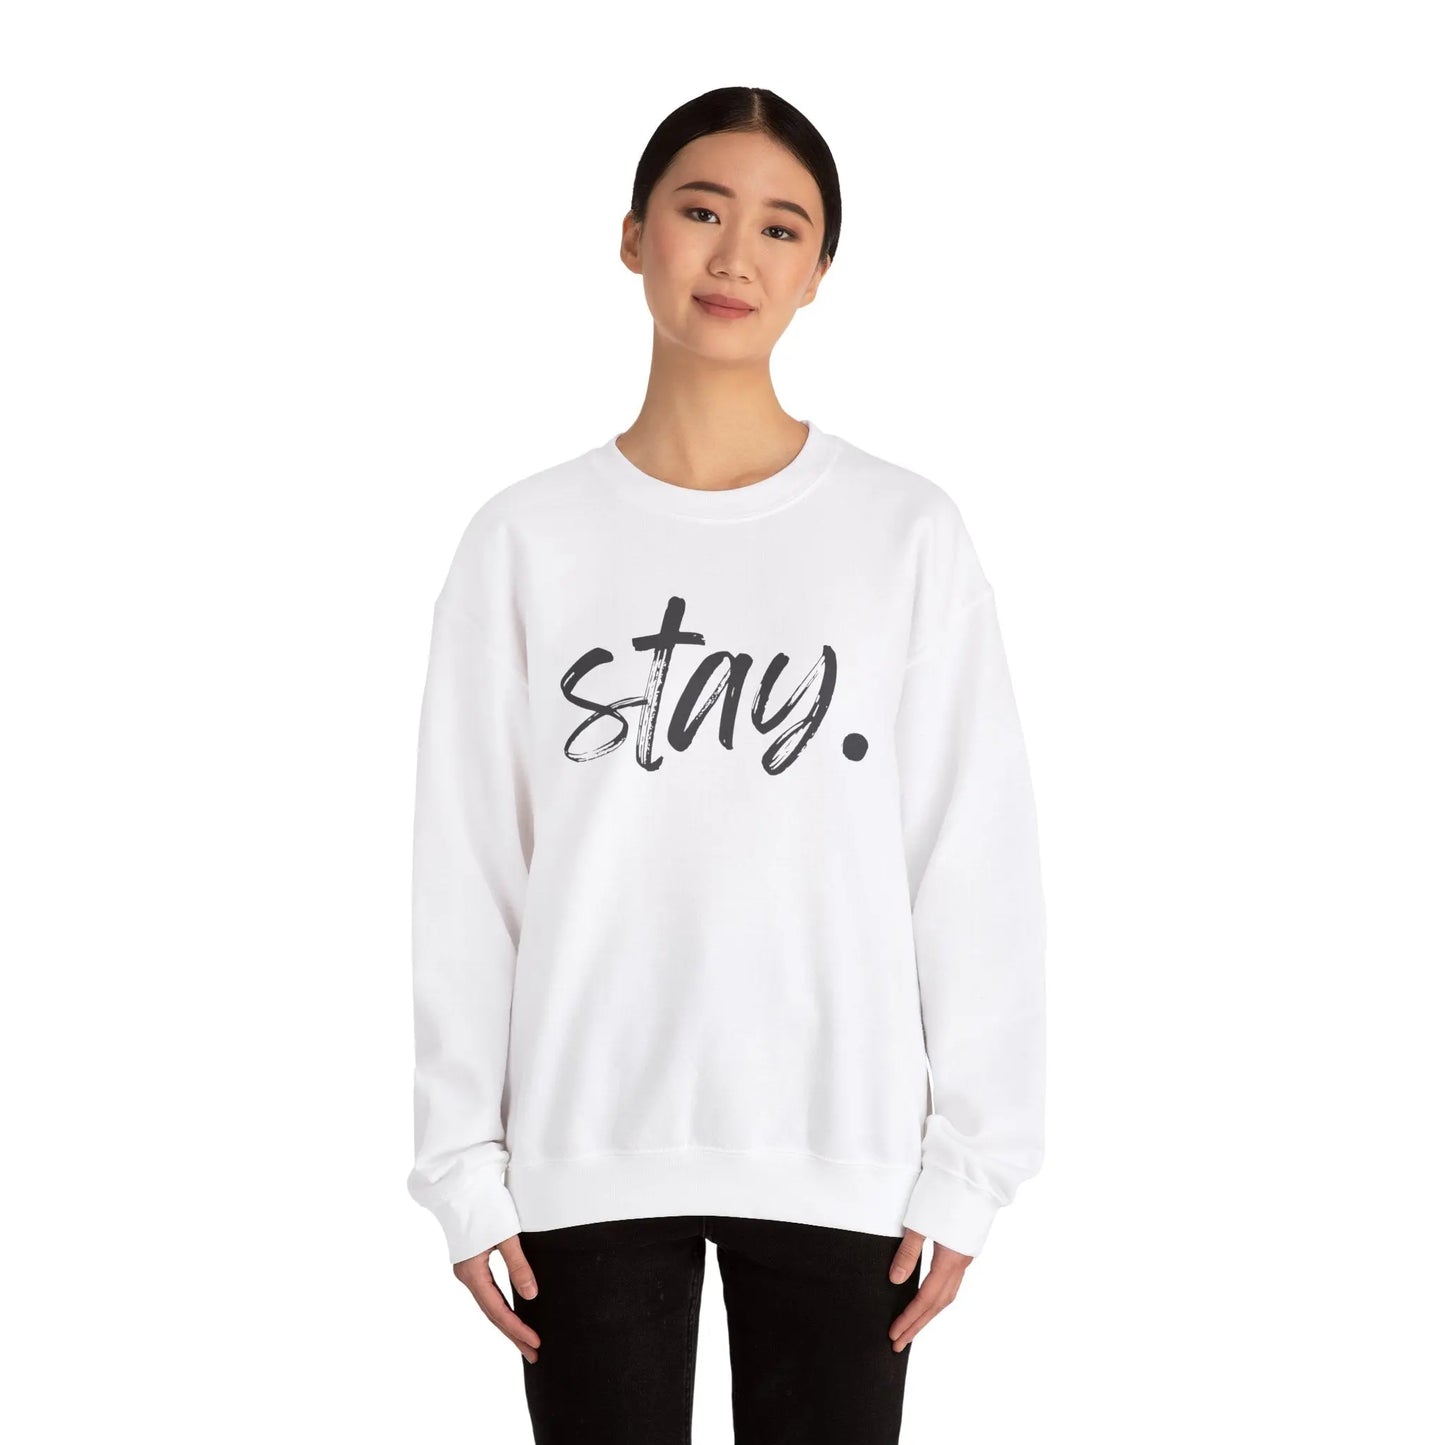 Stay Tomorrow Needs You Sweatshirt Mental Health Awareness Suicide Prevention Mothers Day Fathers Day Gift Veterans Support Military Gift Printify